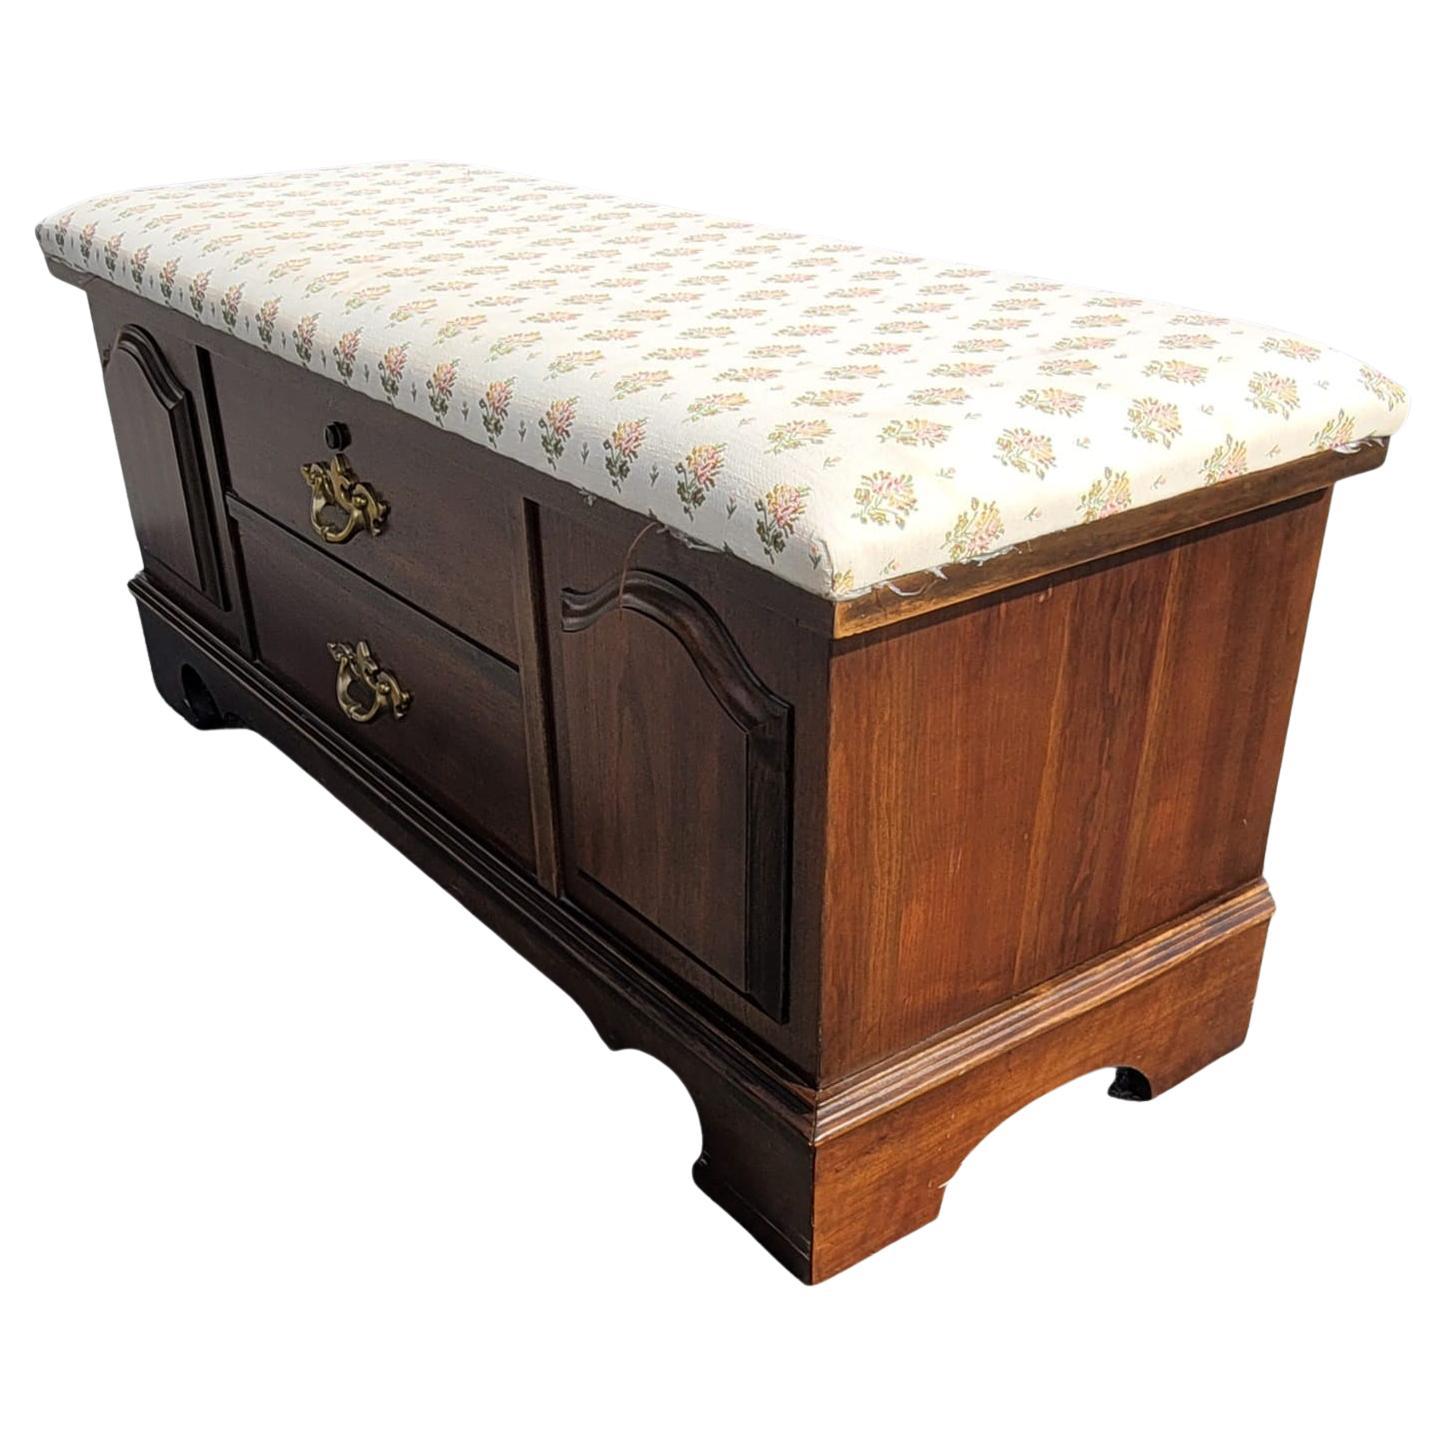 American Lane Cedar Lined Cherry Upholstered Storage Bench Blanket Chest For Sale